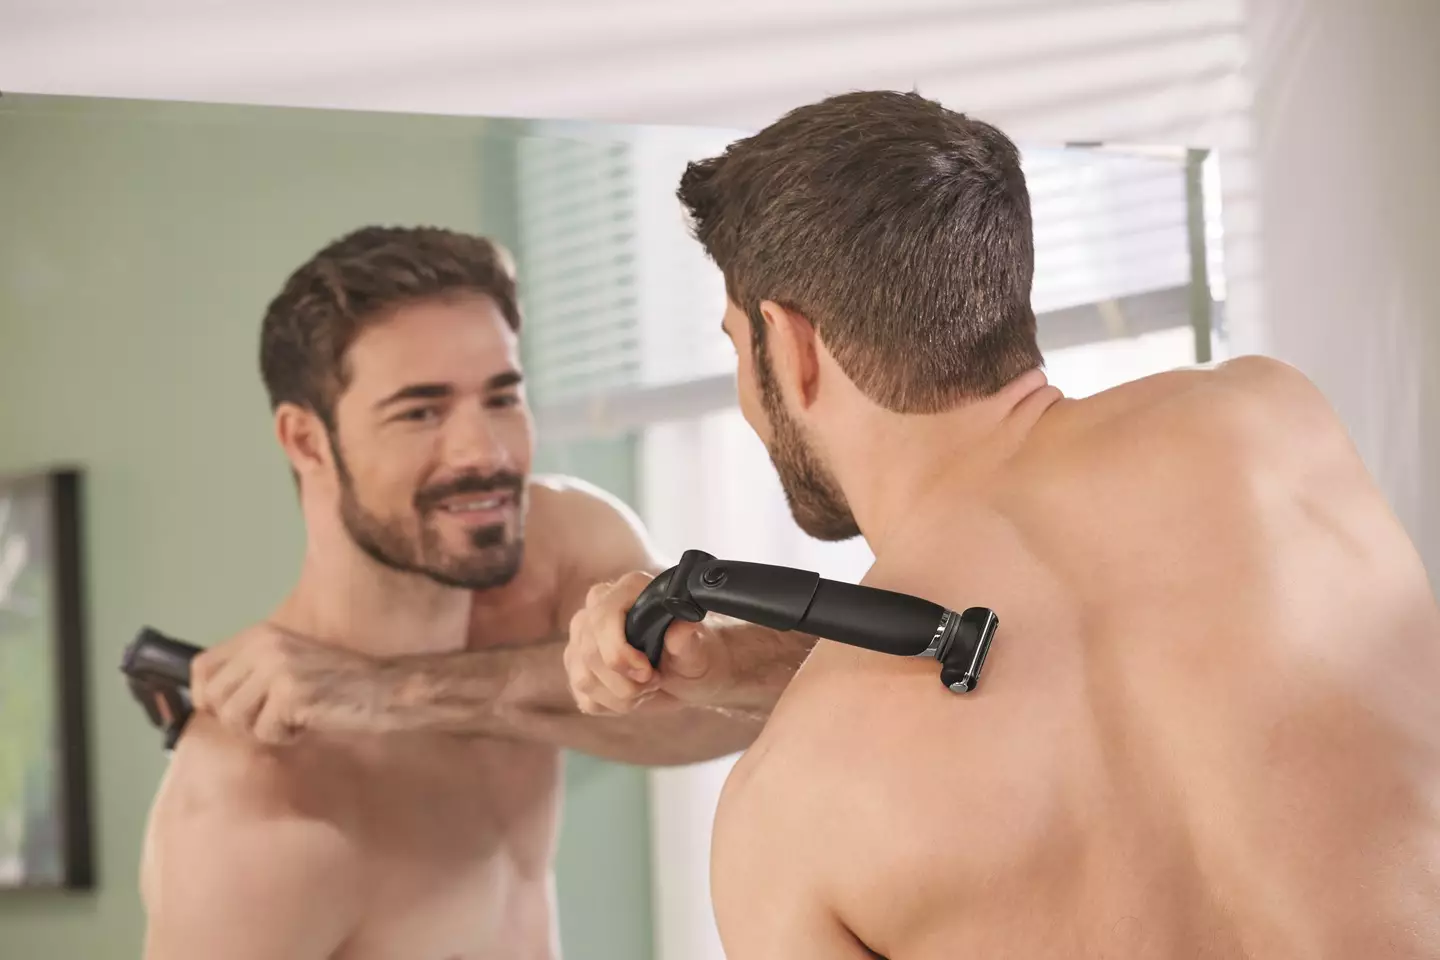 The Body Hair Trimmer costs £14.99.